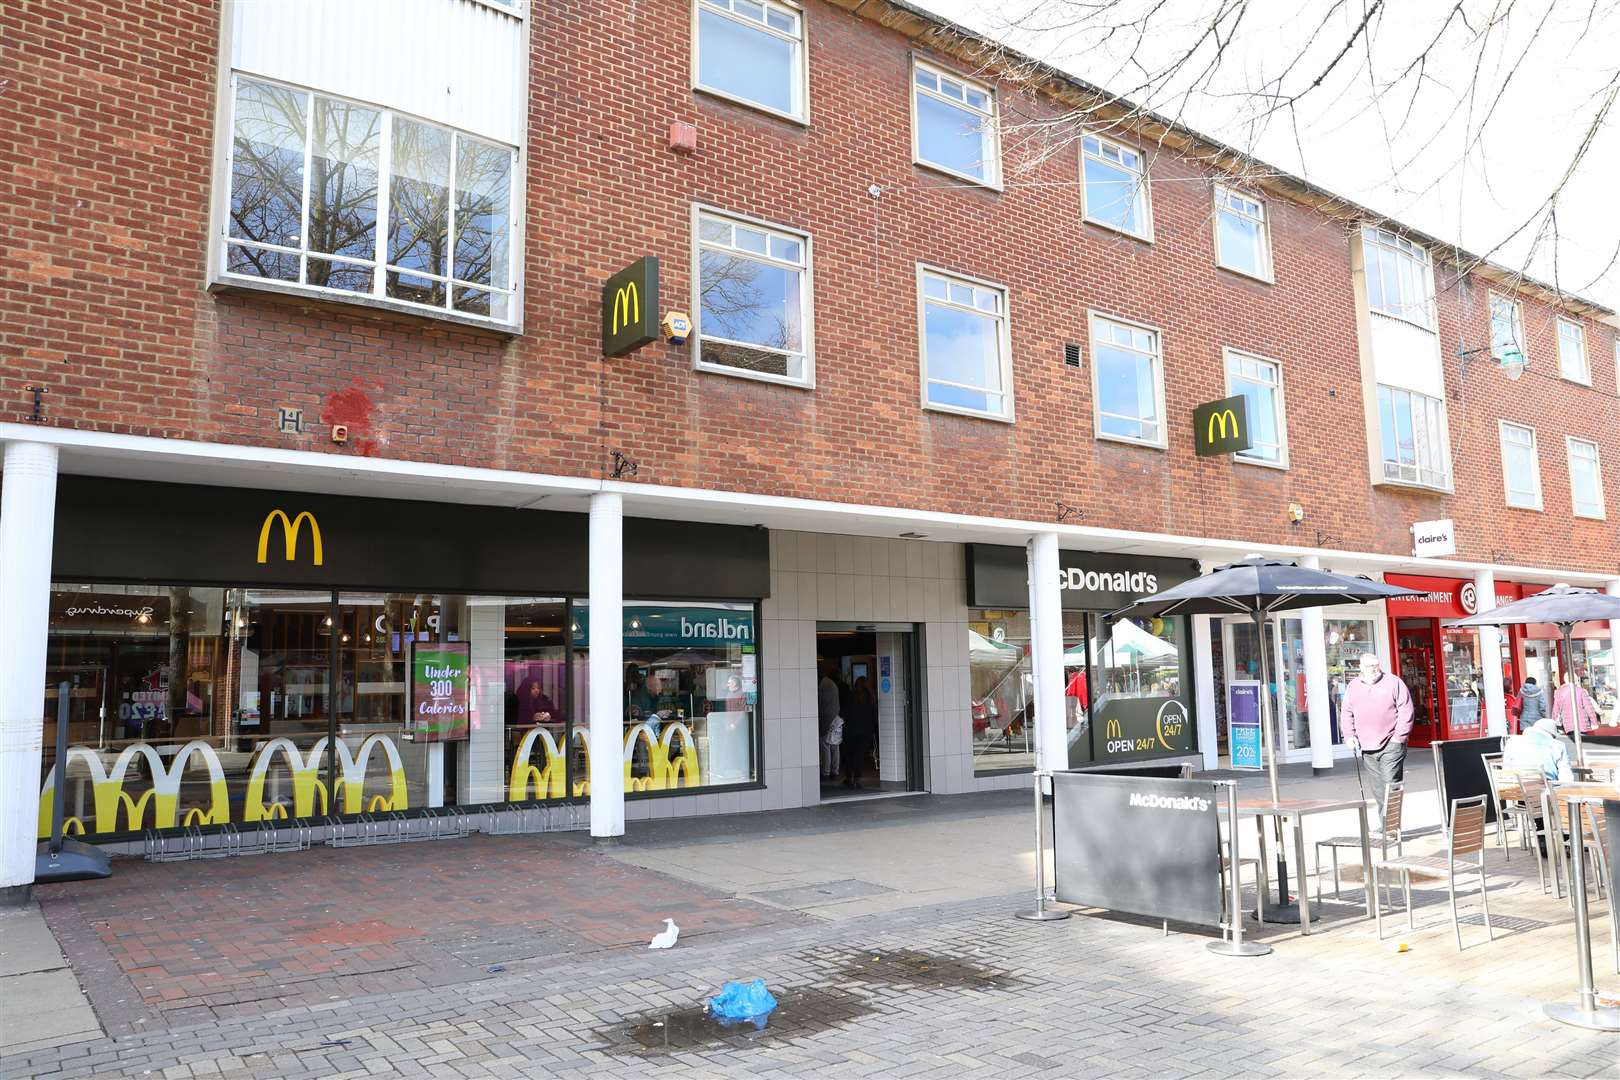 The assault happened at McDonald's in the city centre